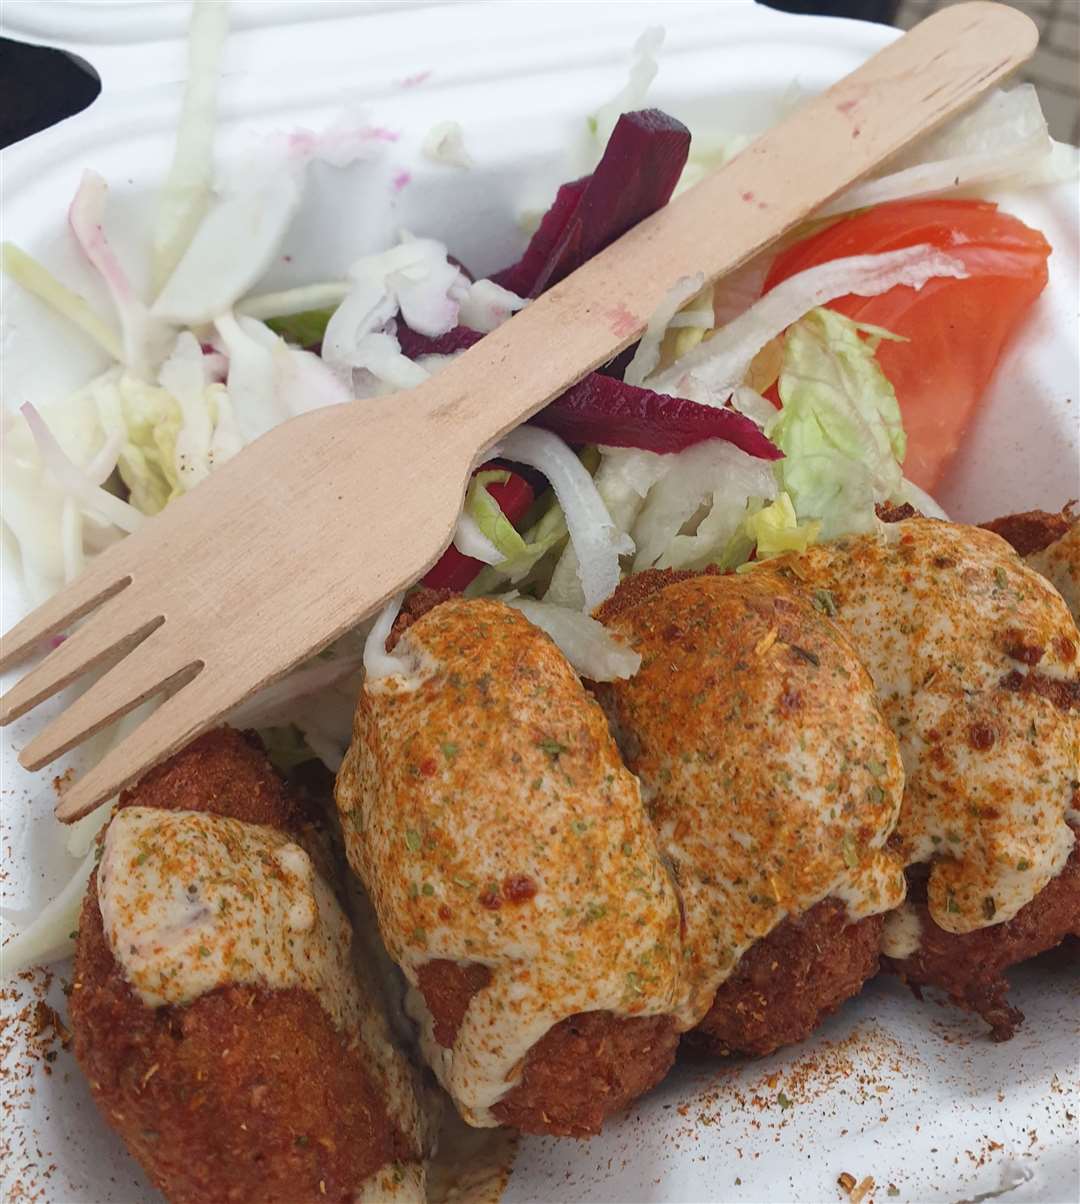 Our reporter ordered the falafel box from the eatery in St George's Street, Canterbury